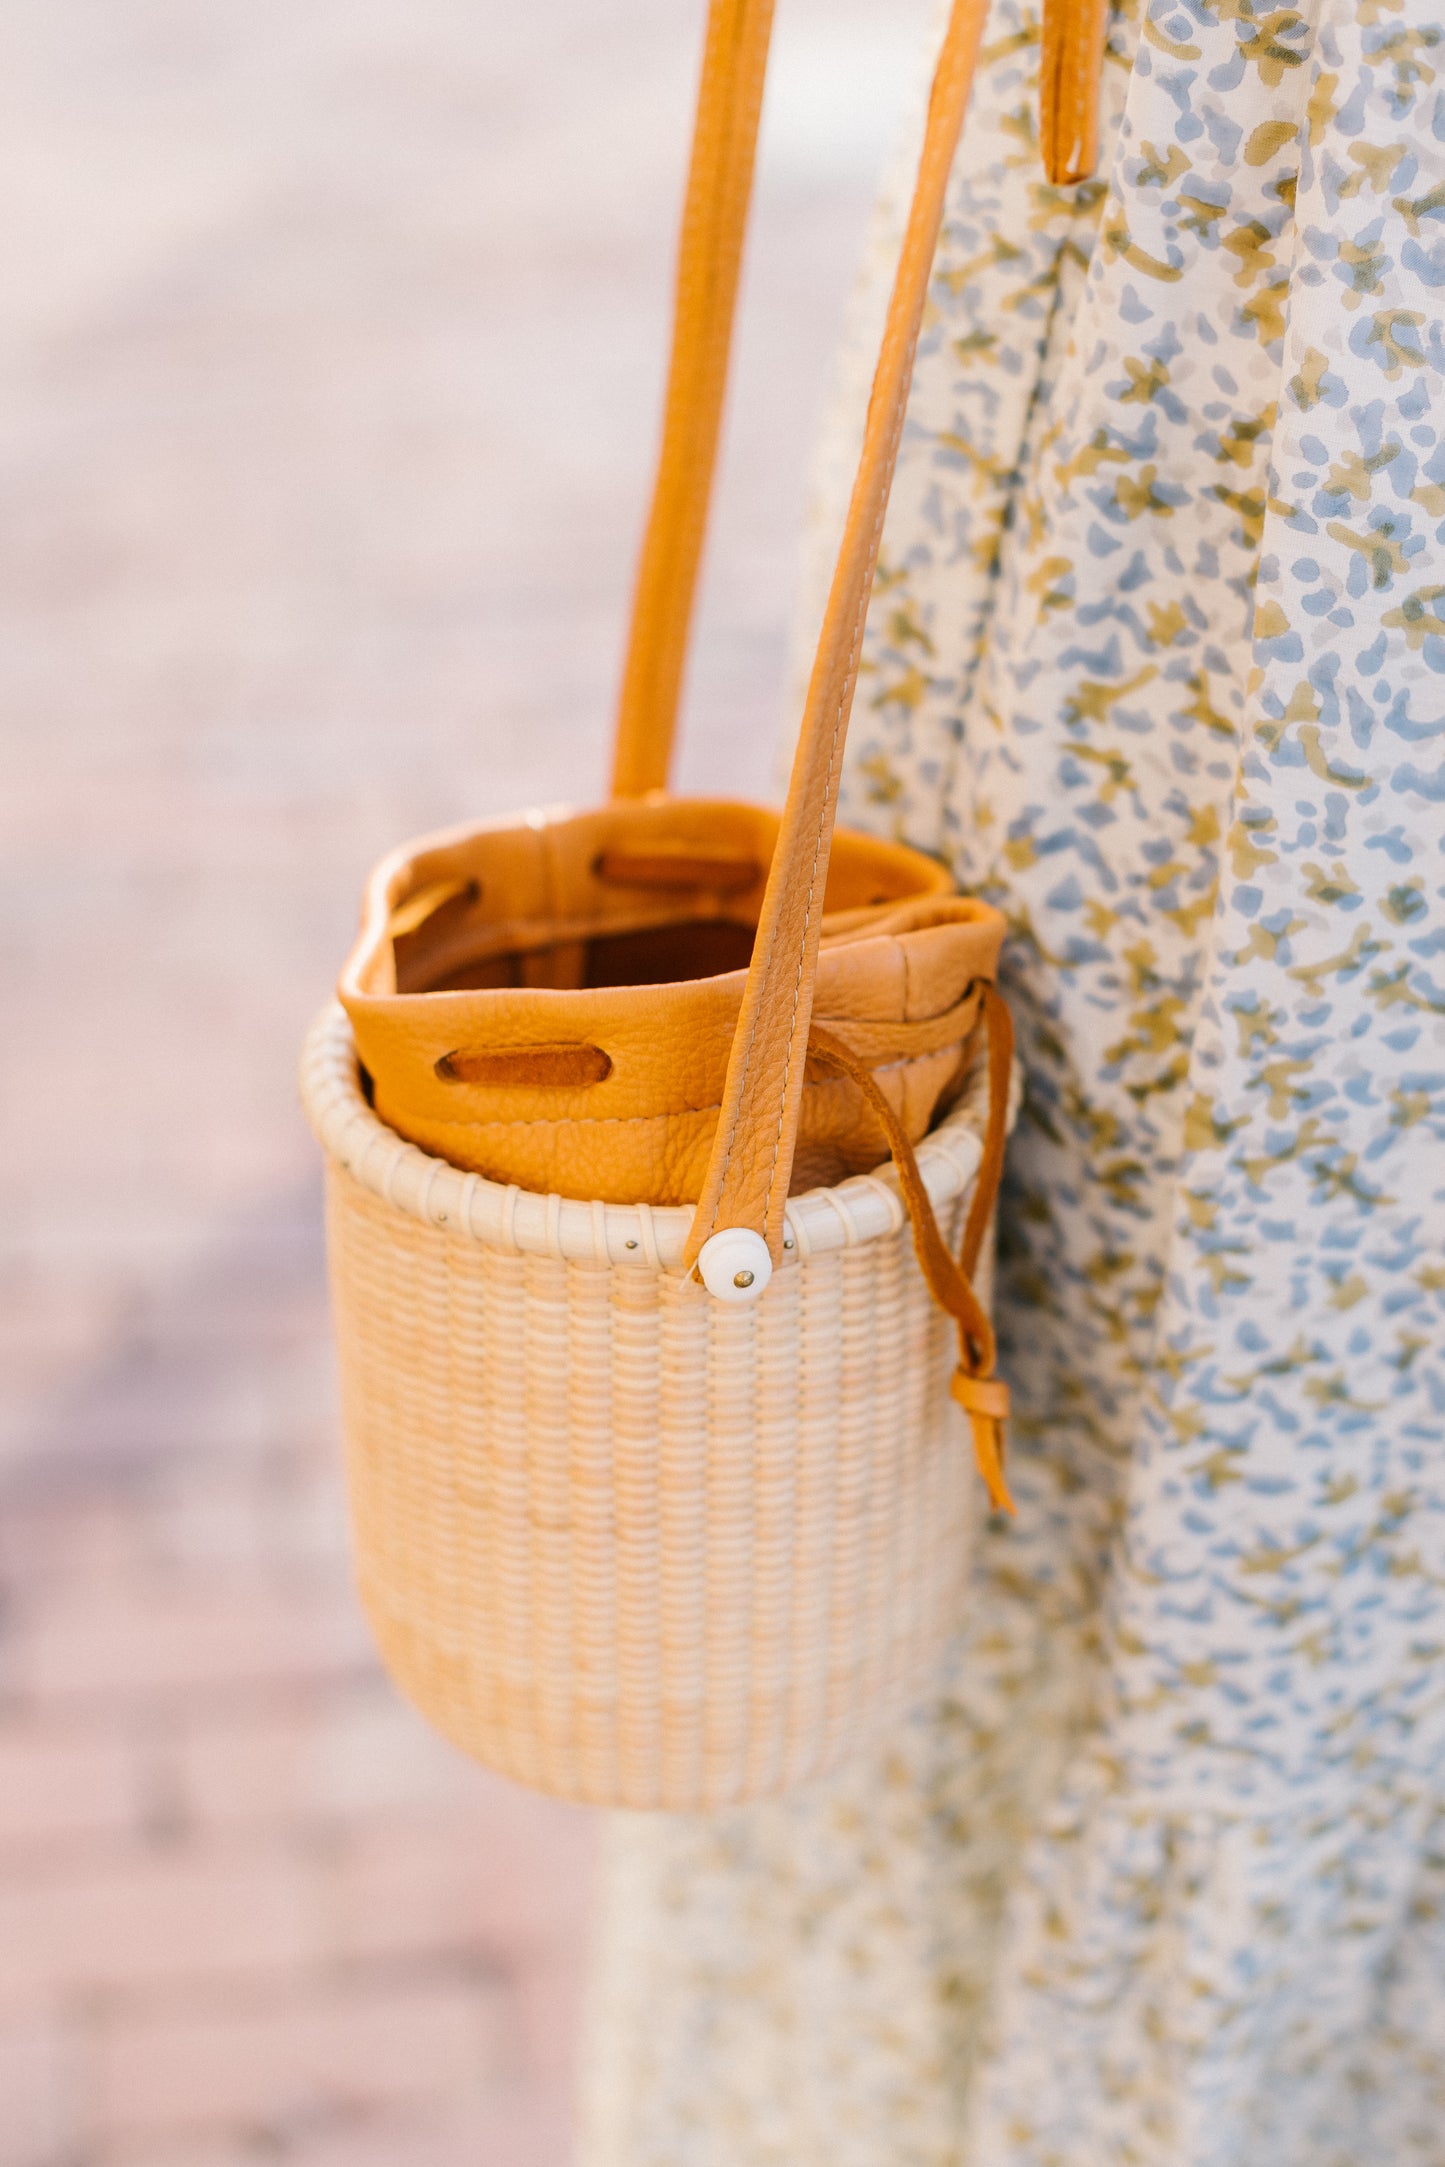 5" Round Handwoven Tote with Tan Leather drawstring bag